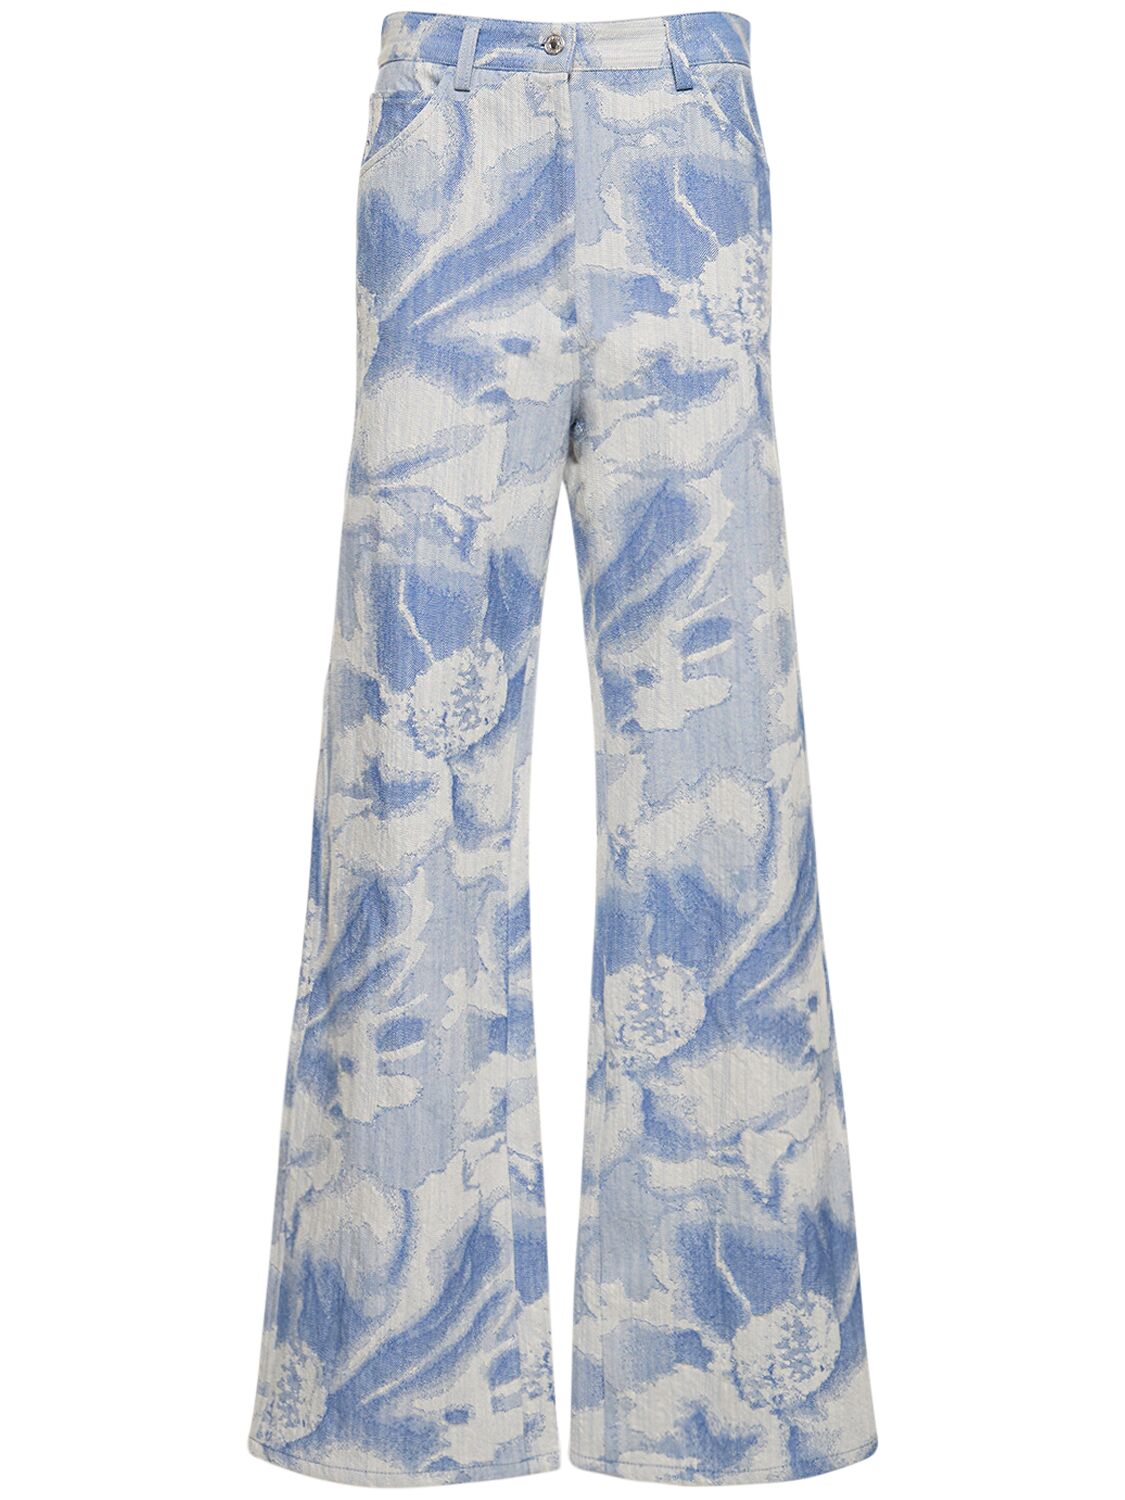 Msgm Printed Cotton Blend Pants In Light Blue